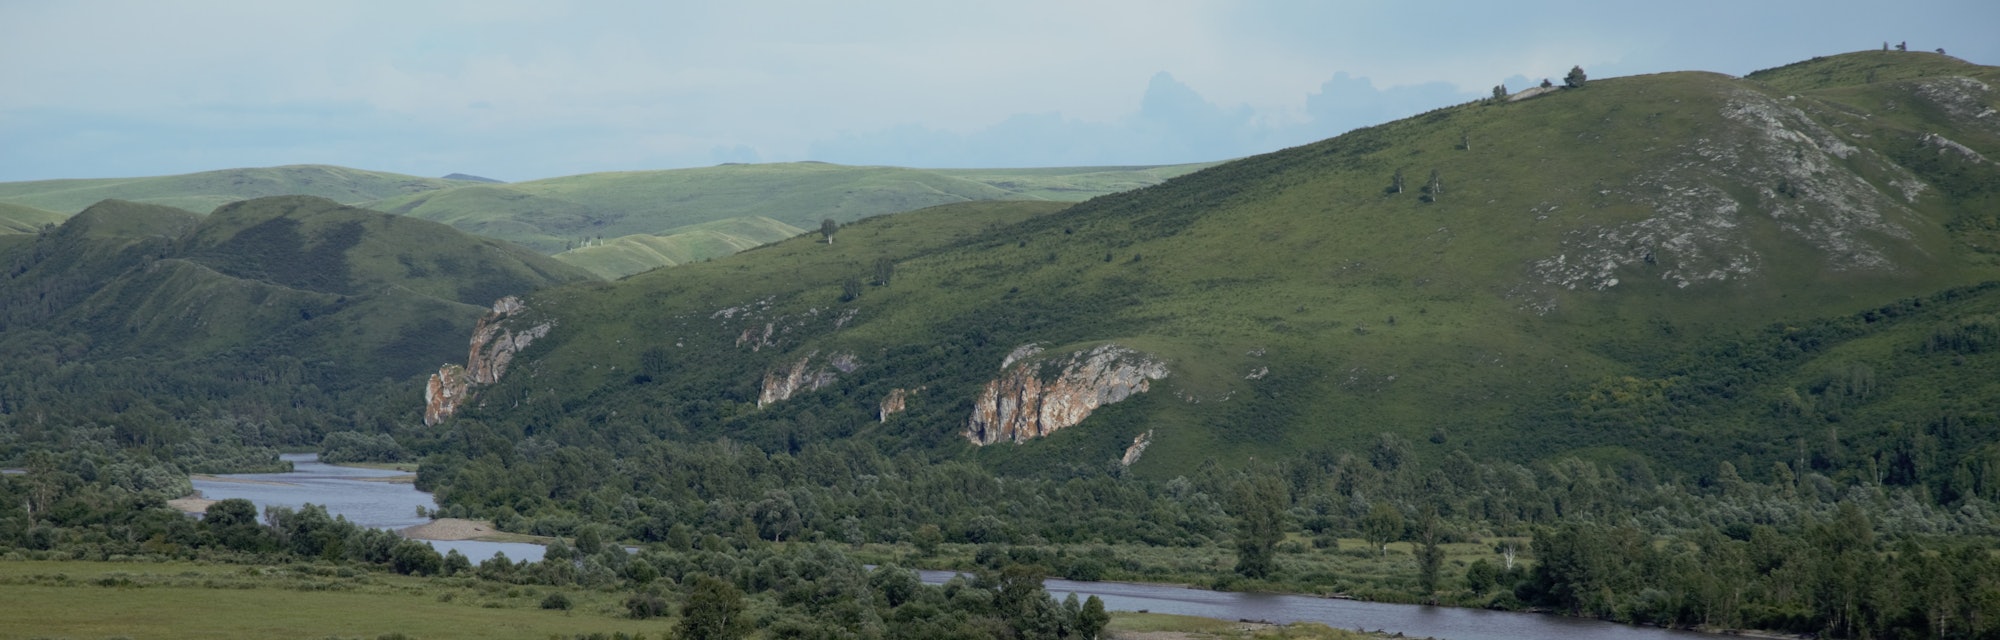 Neanderthal hunting grounds in southern Siberia — the Charysh River valley, with Chagyrskaya Cave in...